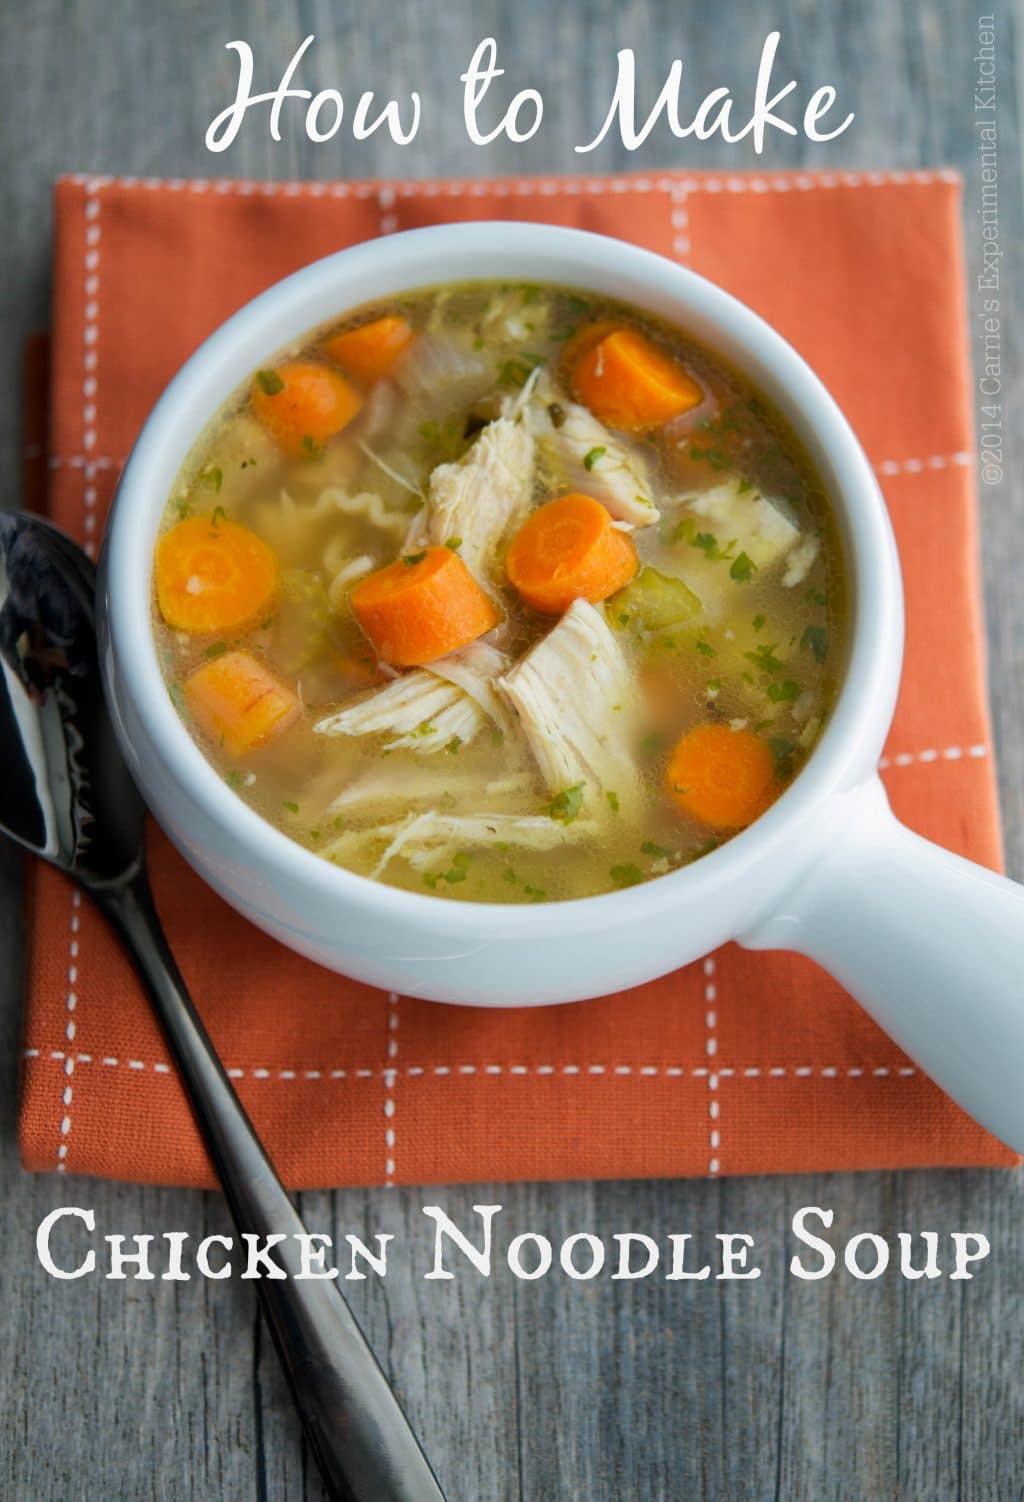 Make Chicken Noodle Soup
 How to Make Chicken Noodle Soup Carrie’s Experimental